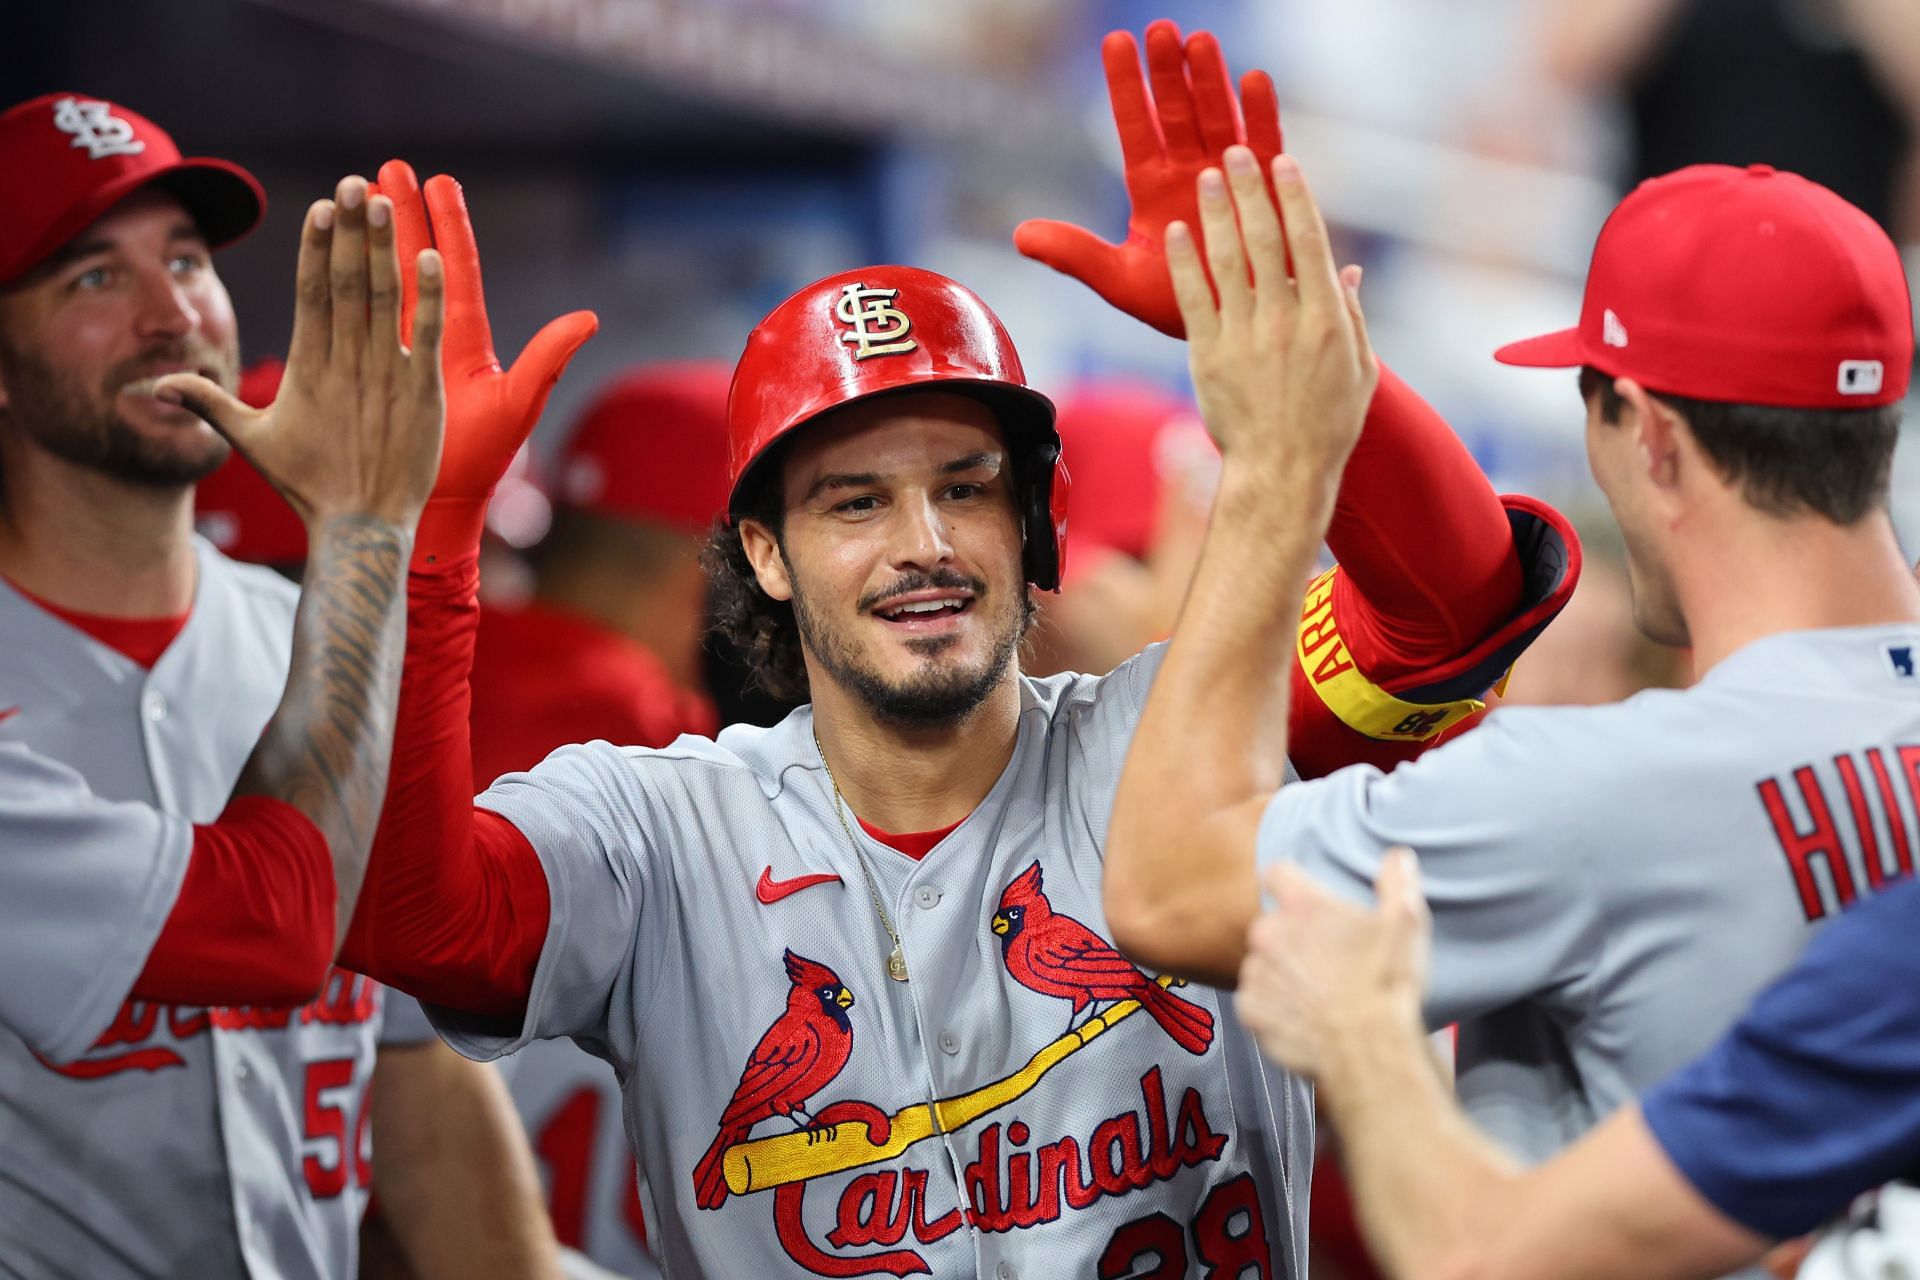 St. Louis Cardinals are going to take on Kansas City Royals in the near future